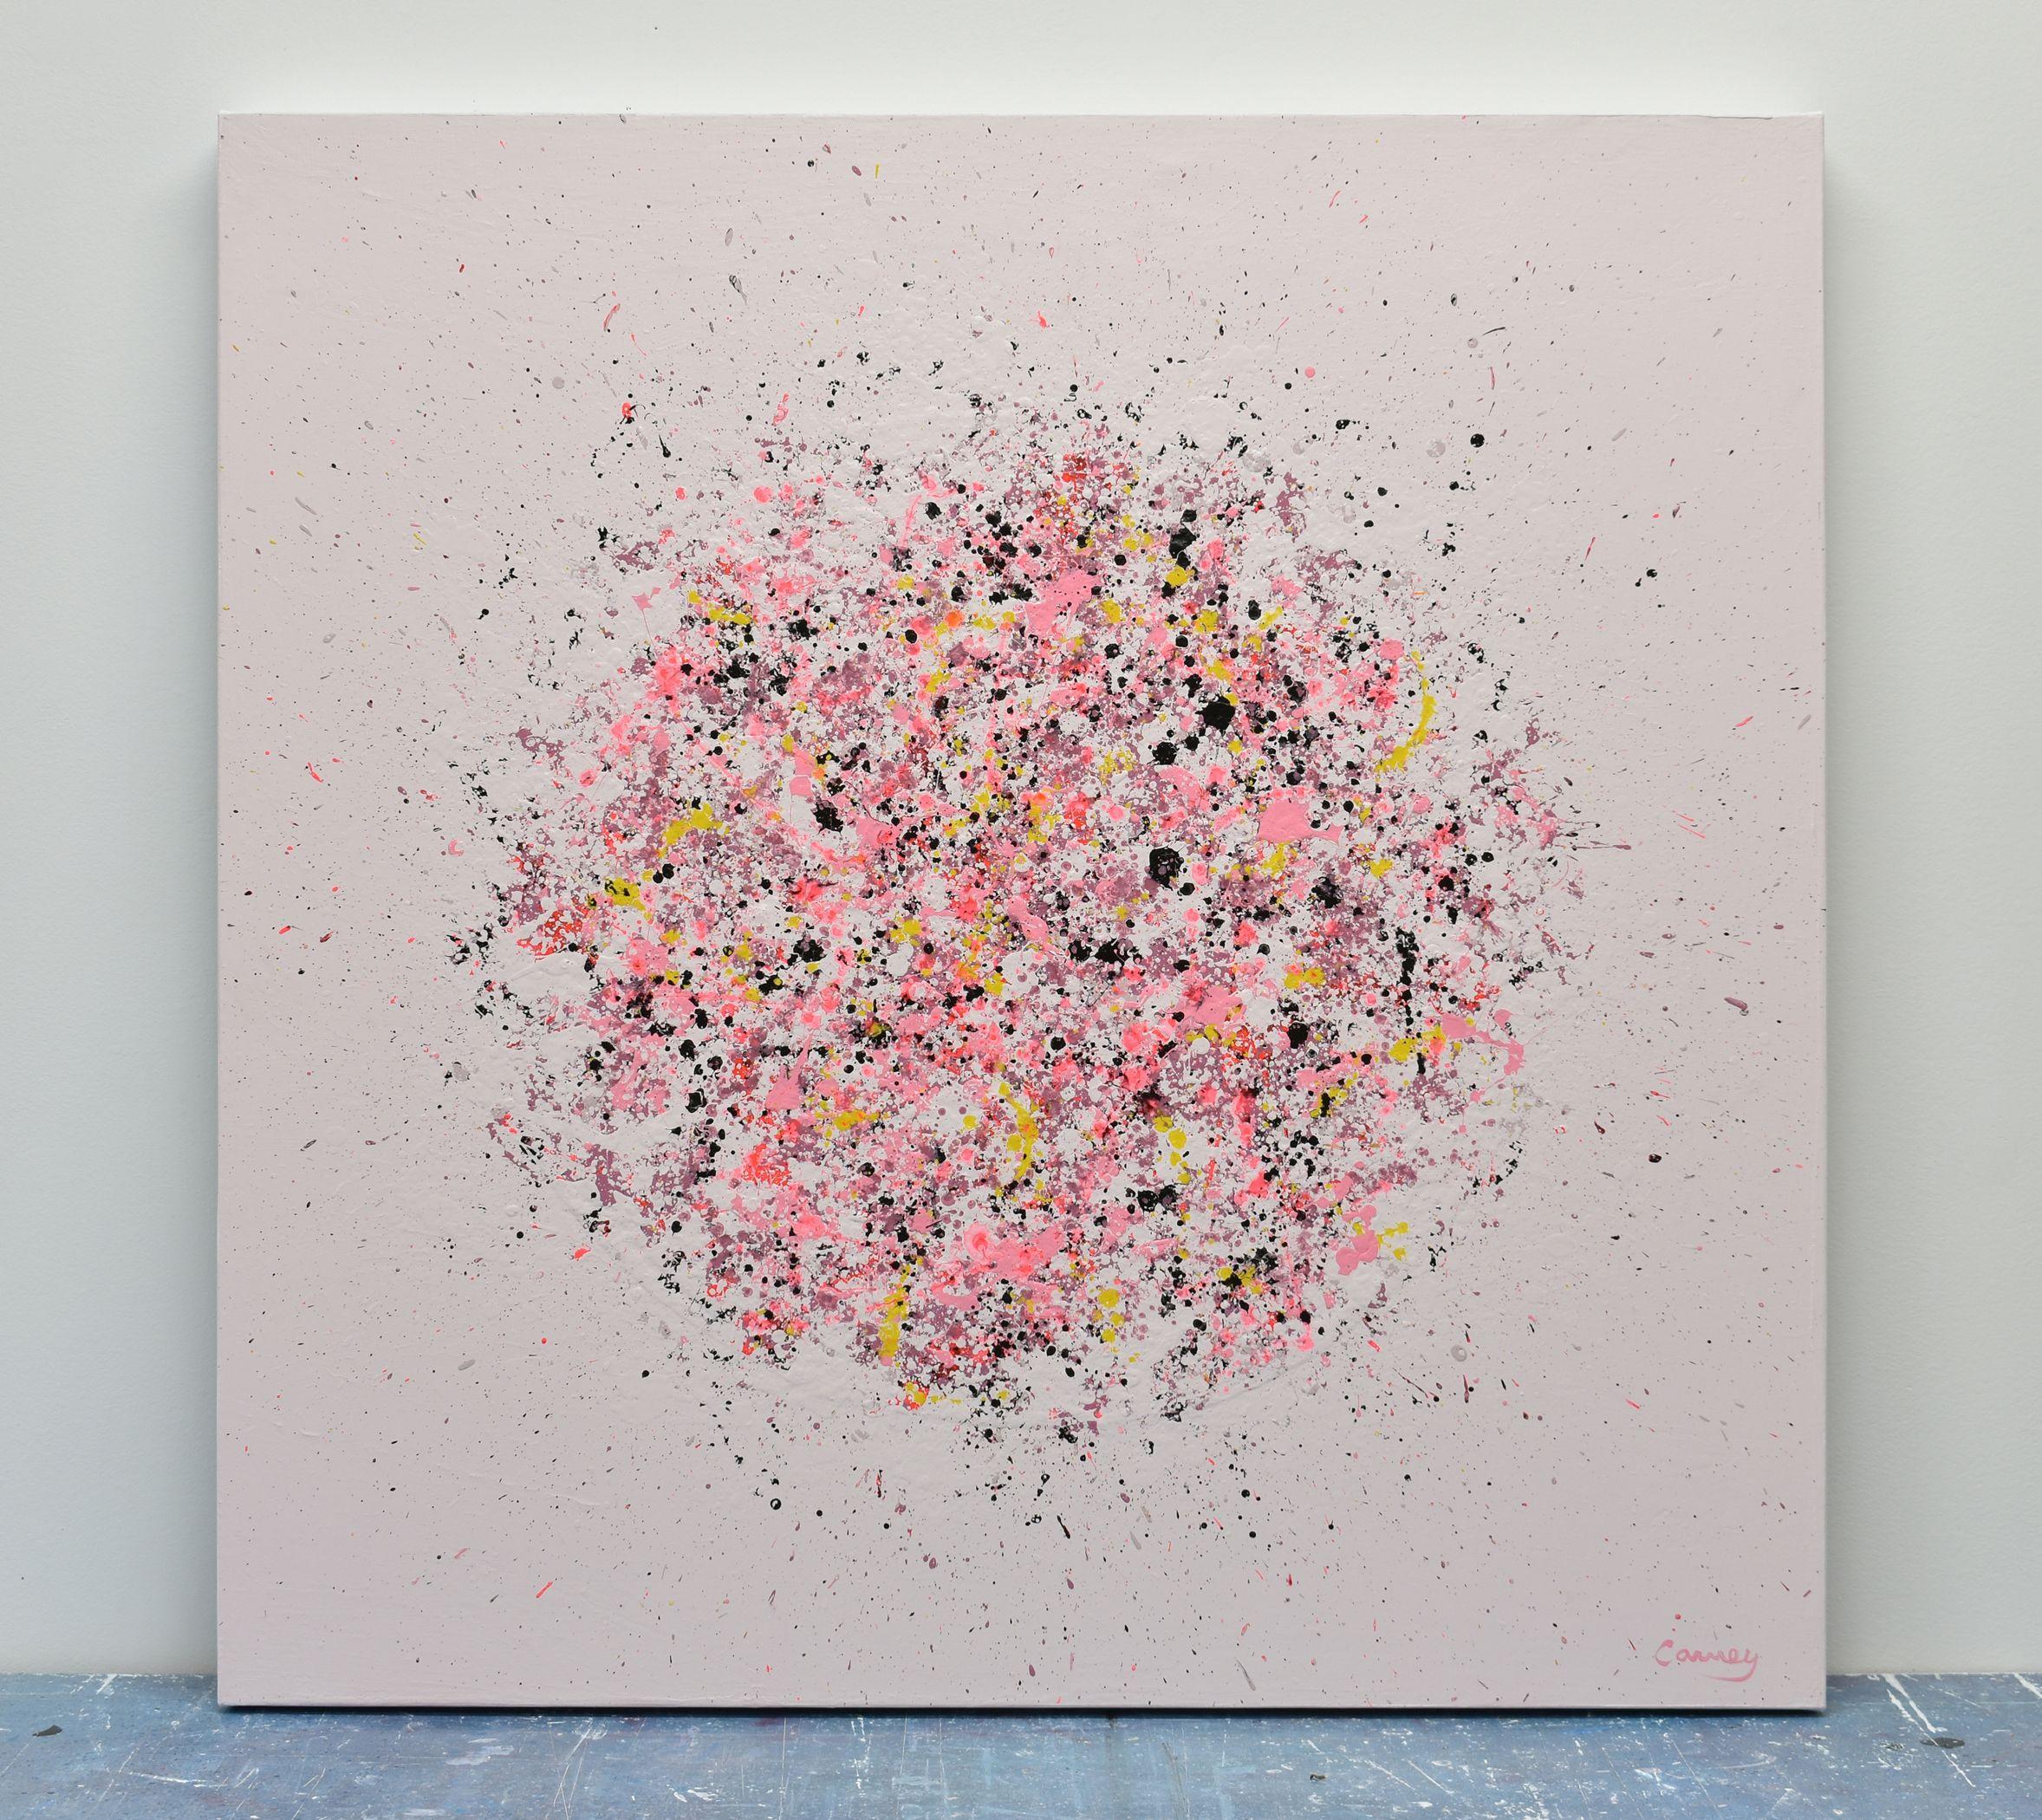 Petal Burst 37 is an abstract painting in acrylic on canvas. Various shades of pink, coral, yellow and black explode onto a pale pink background. It is part of the Petal Burst series, a collection of floral abstract paintings where drip and spatter